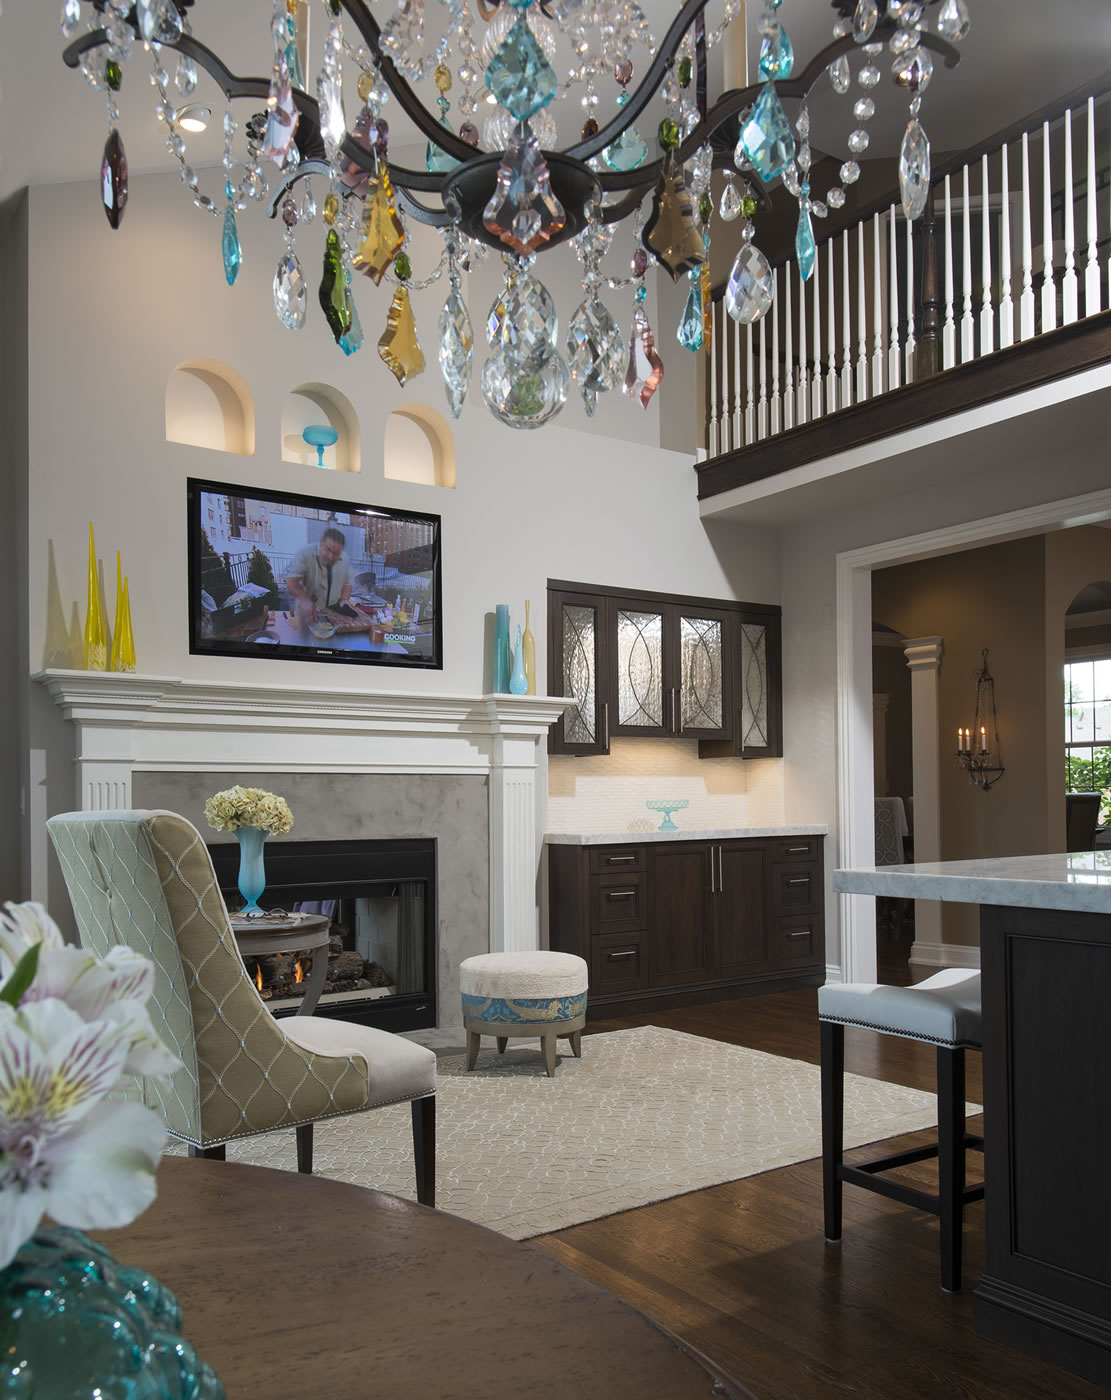 Detroit Home 2014 - Interior Design Award - Best Small Space Remodel